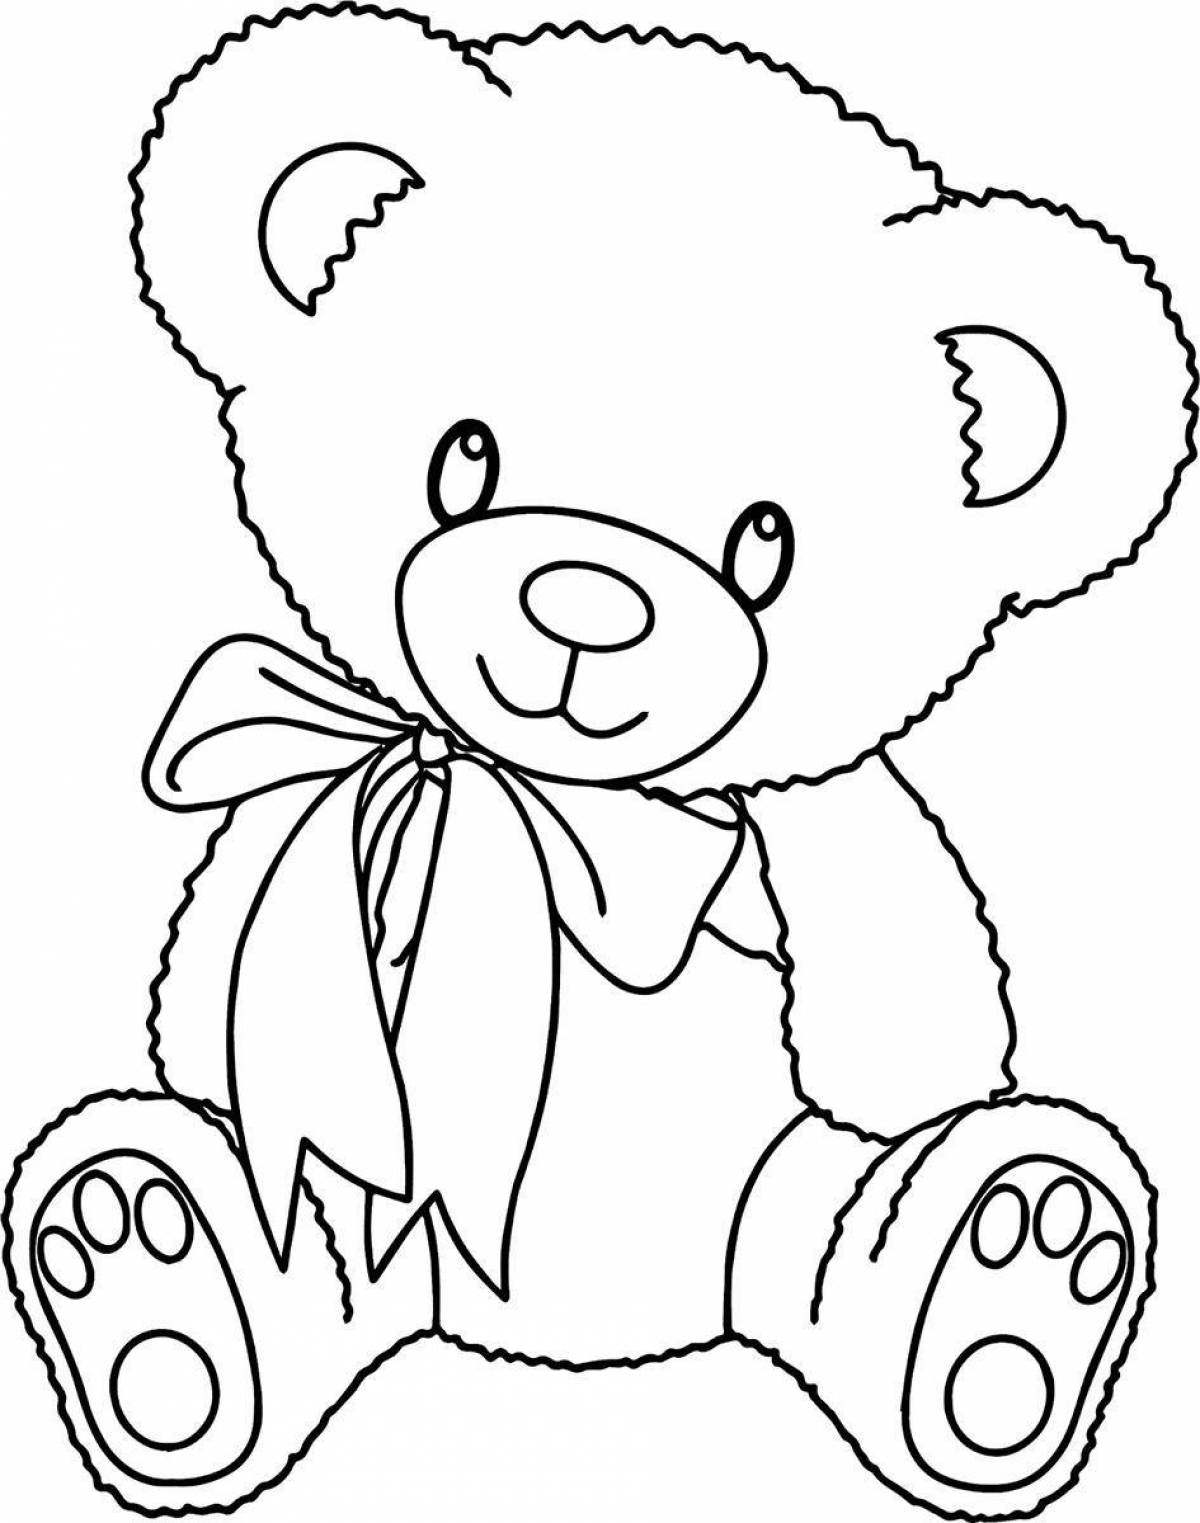 Cute coloring bear for children 4-5 years old